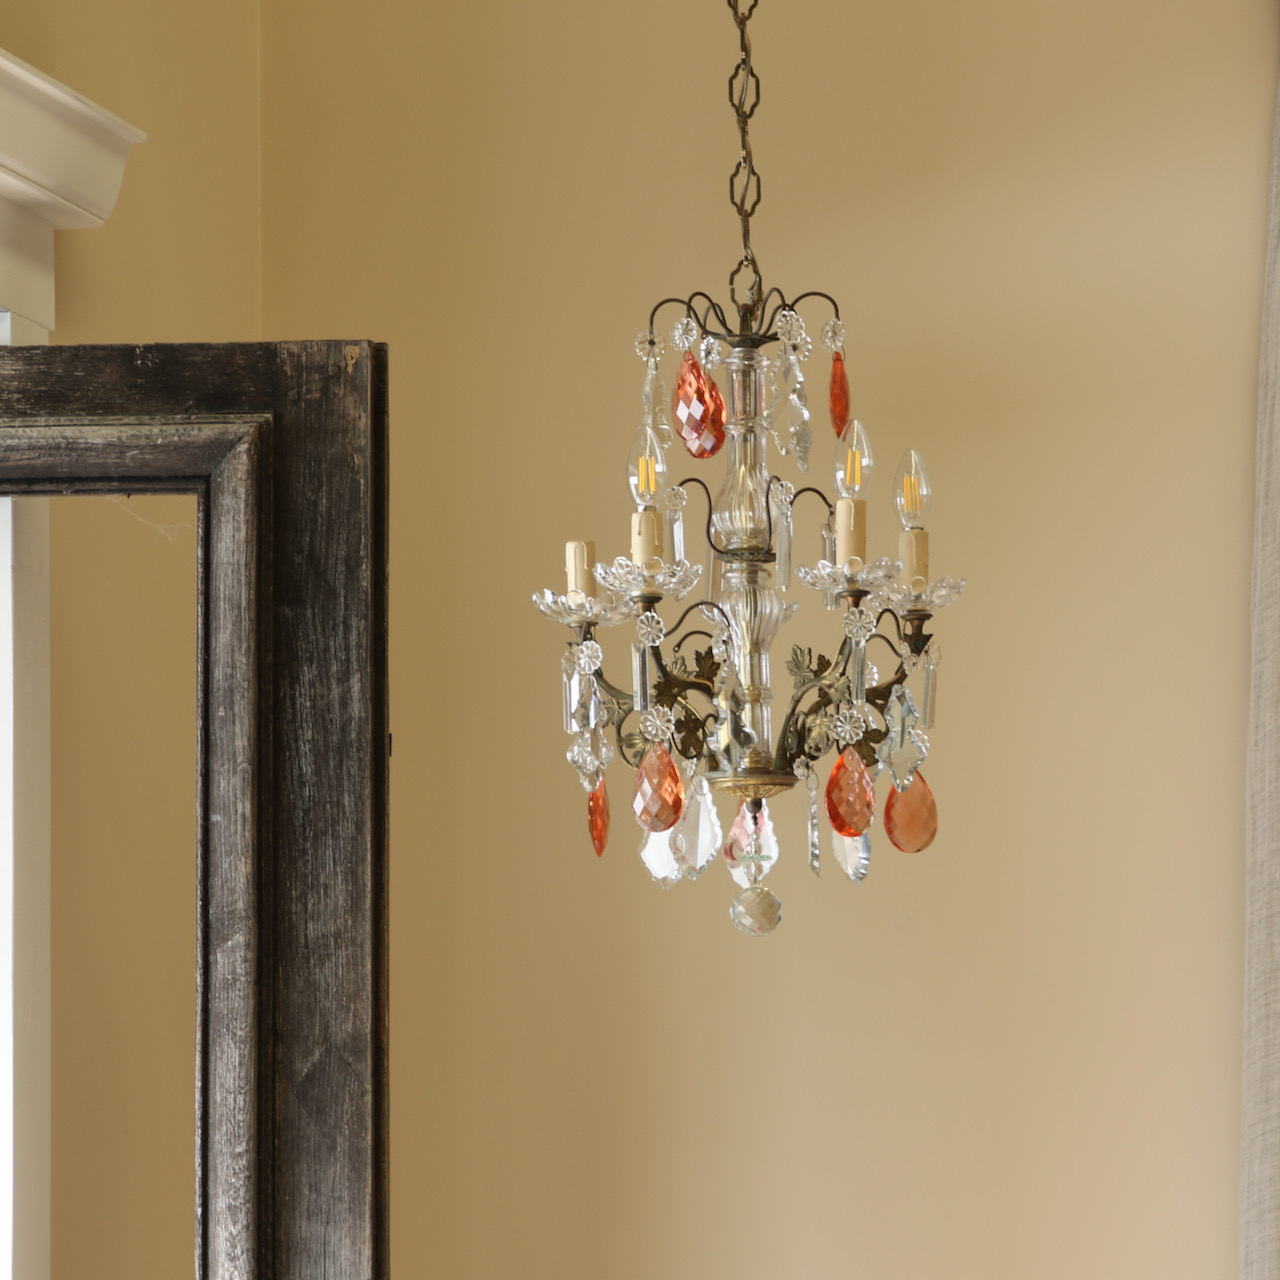 132-47 - French Chandelier